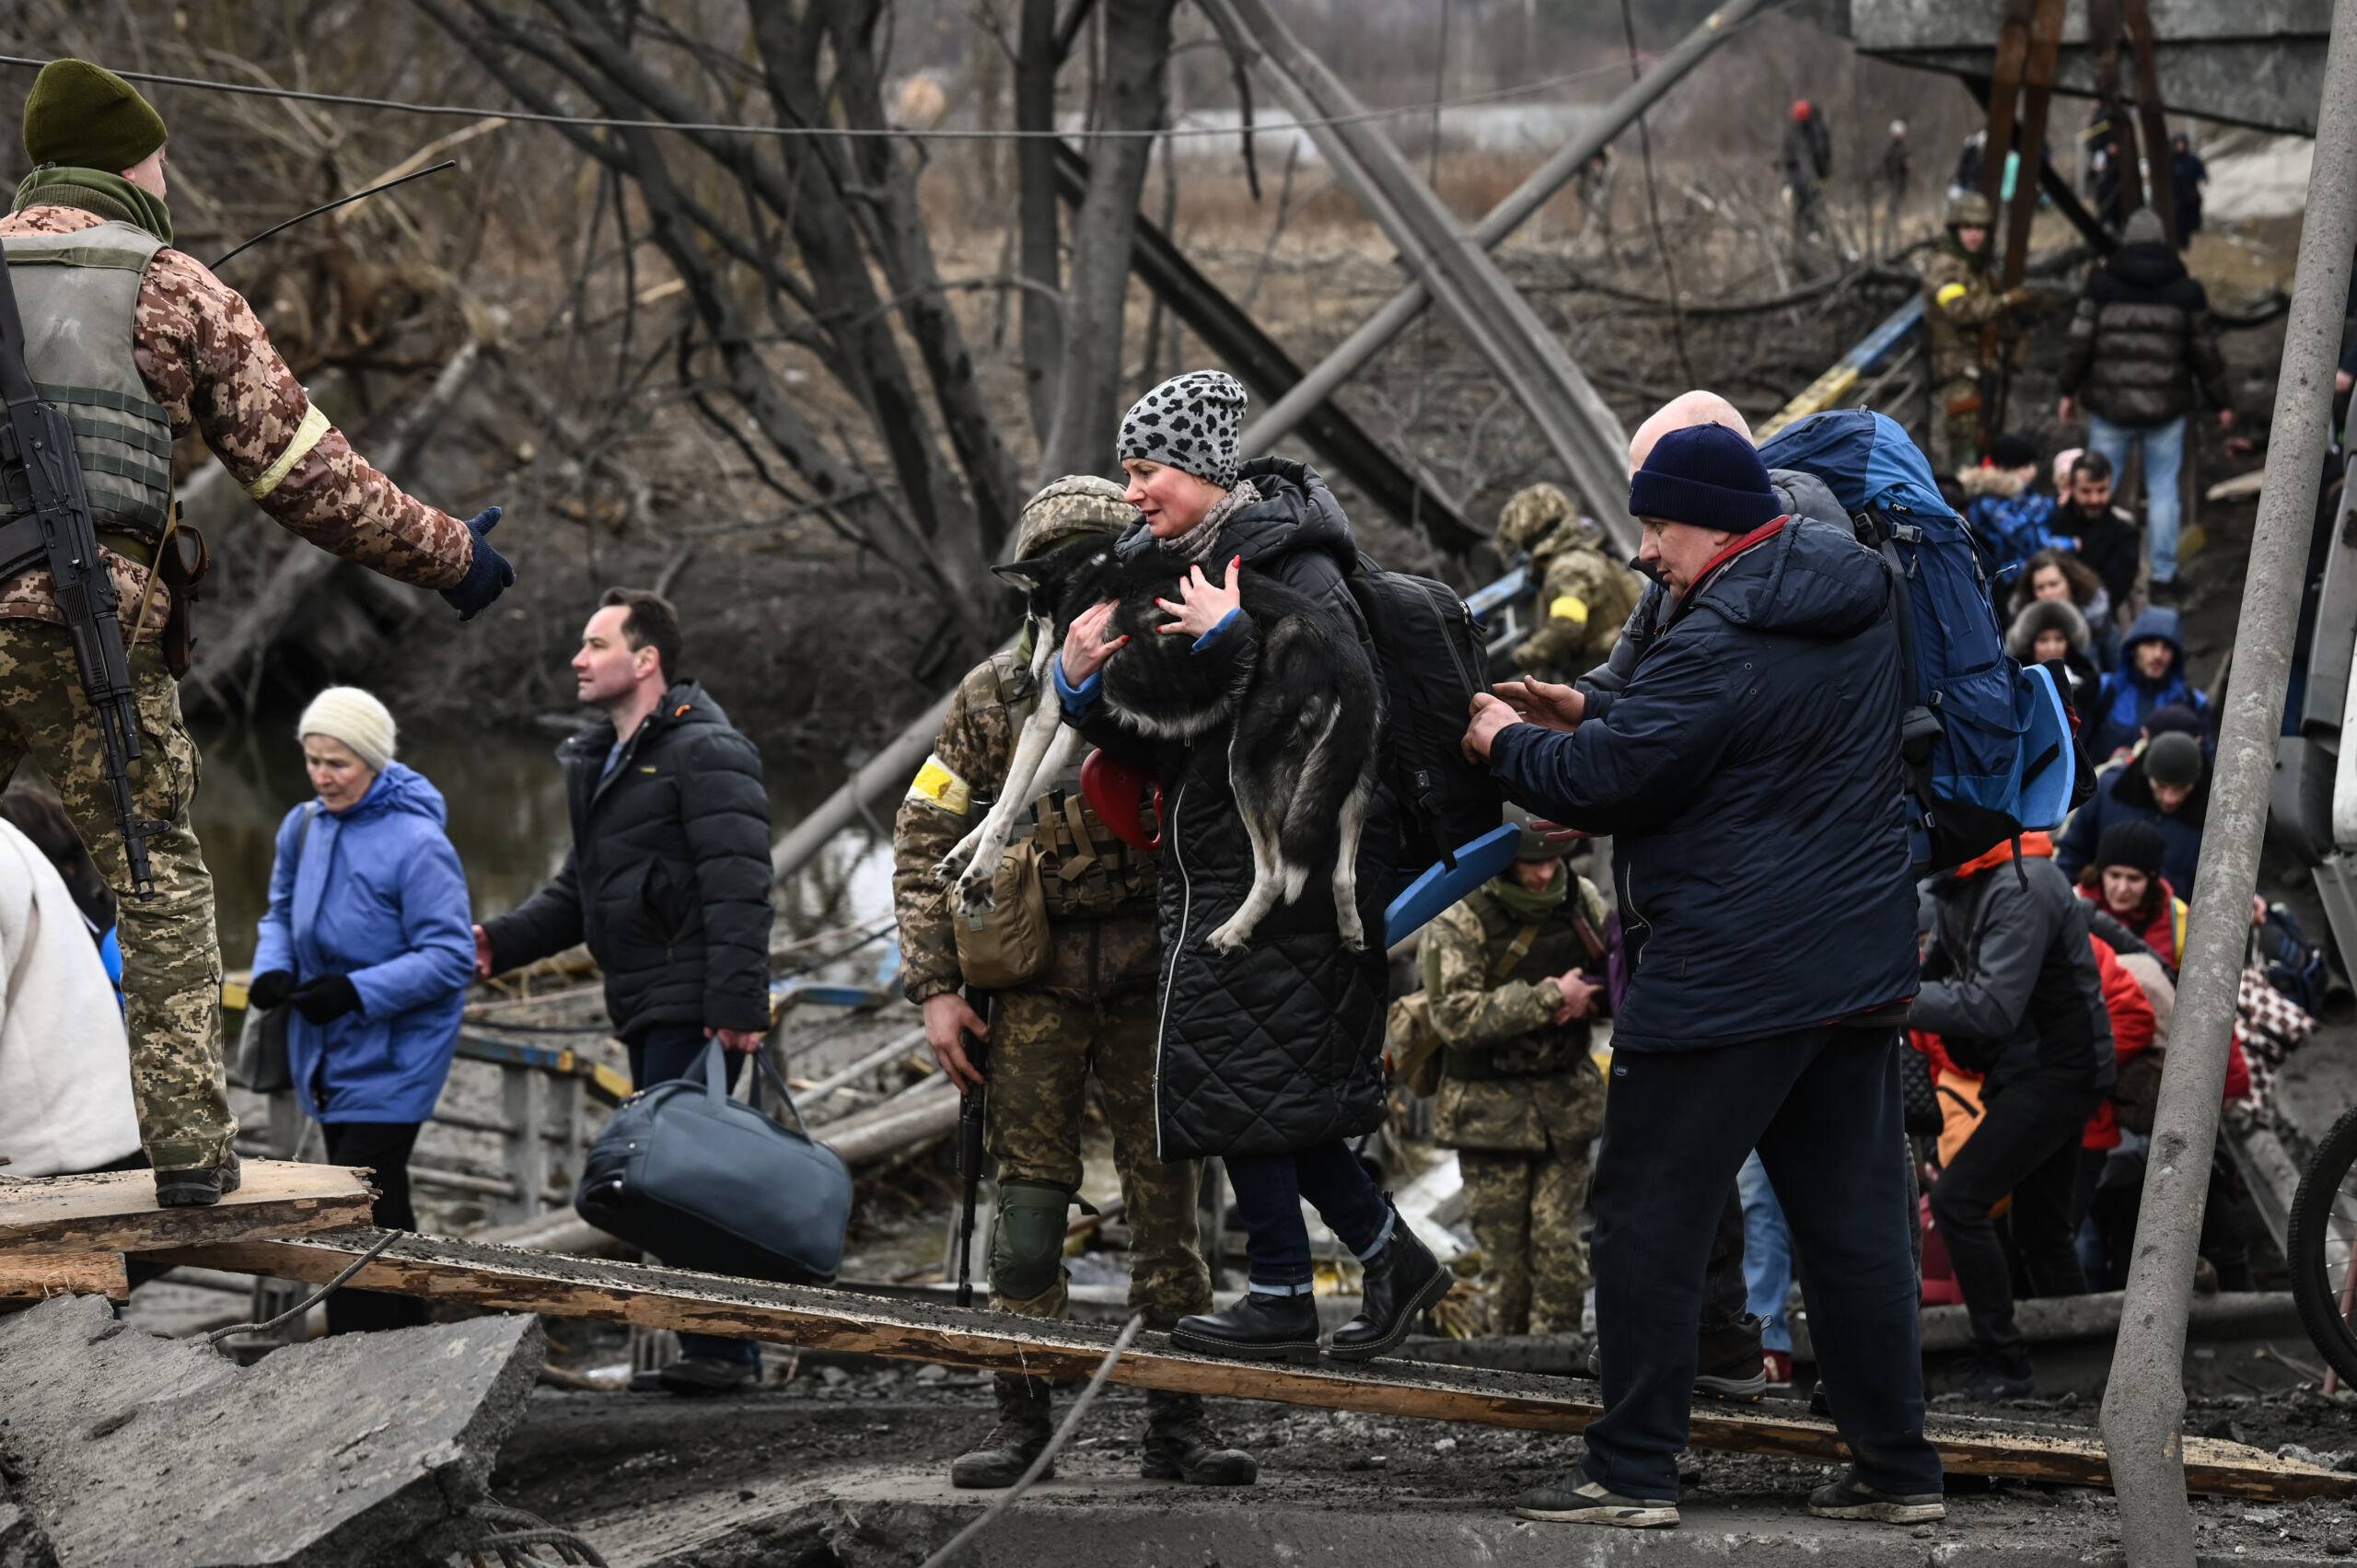 A woman carries a dog  while people cross a destroyed bridge as they  evacuate the city of Irpin, northwest of Kyiv, during heavy shelling and bombing on March 5, 2022, 10 days after Russia launched a military in vasion on Ukraine. (Photo by Aris Messinis / AFP)